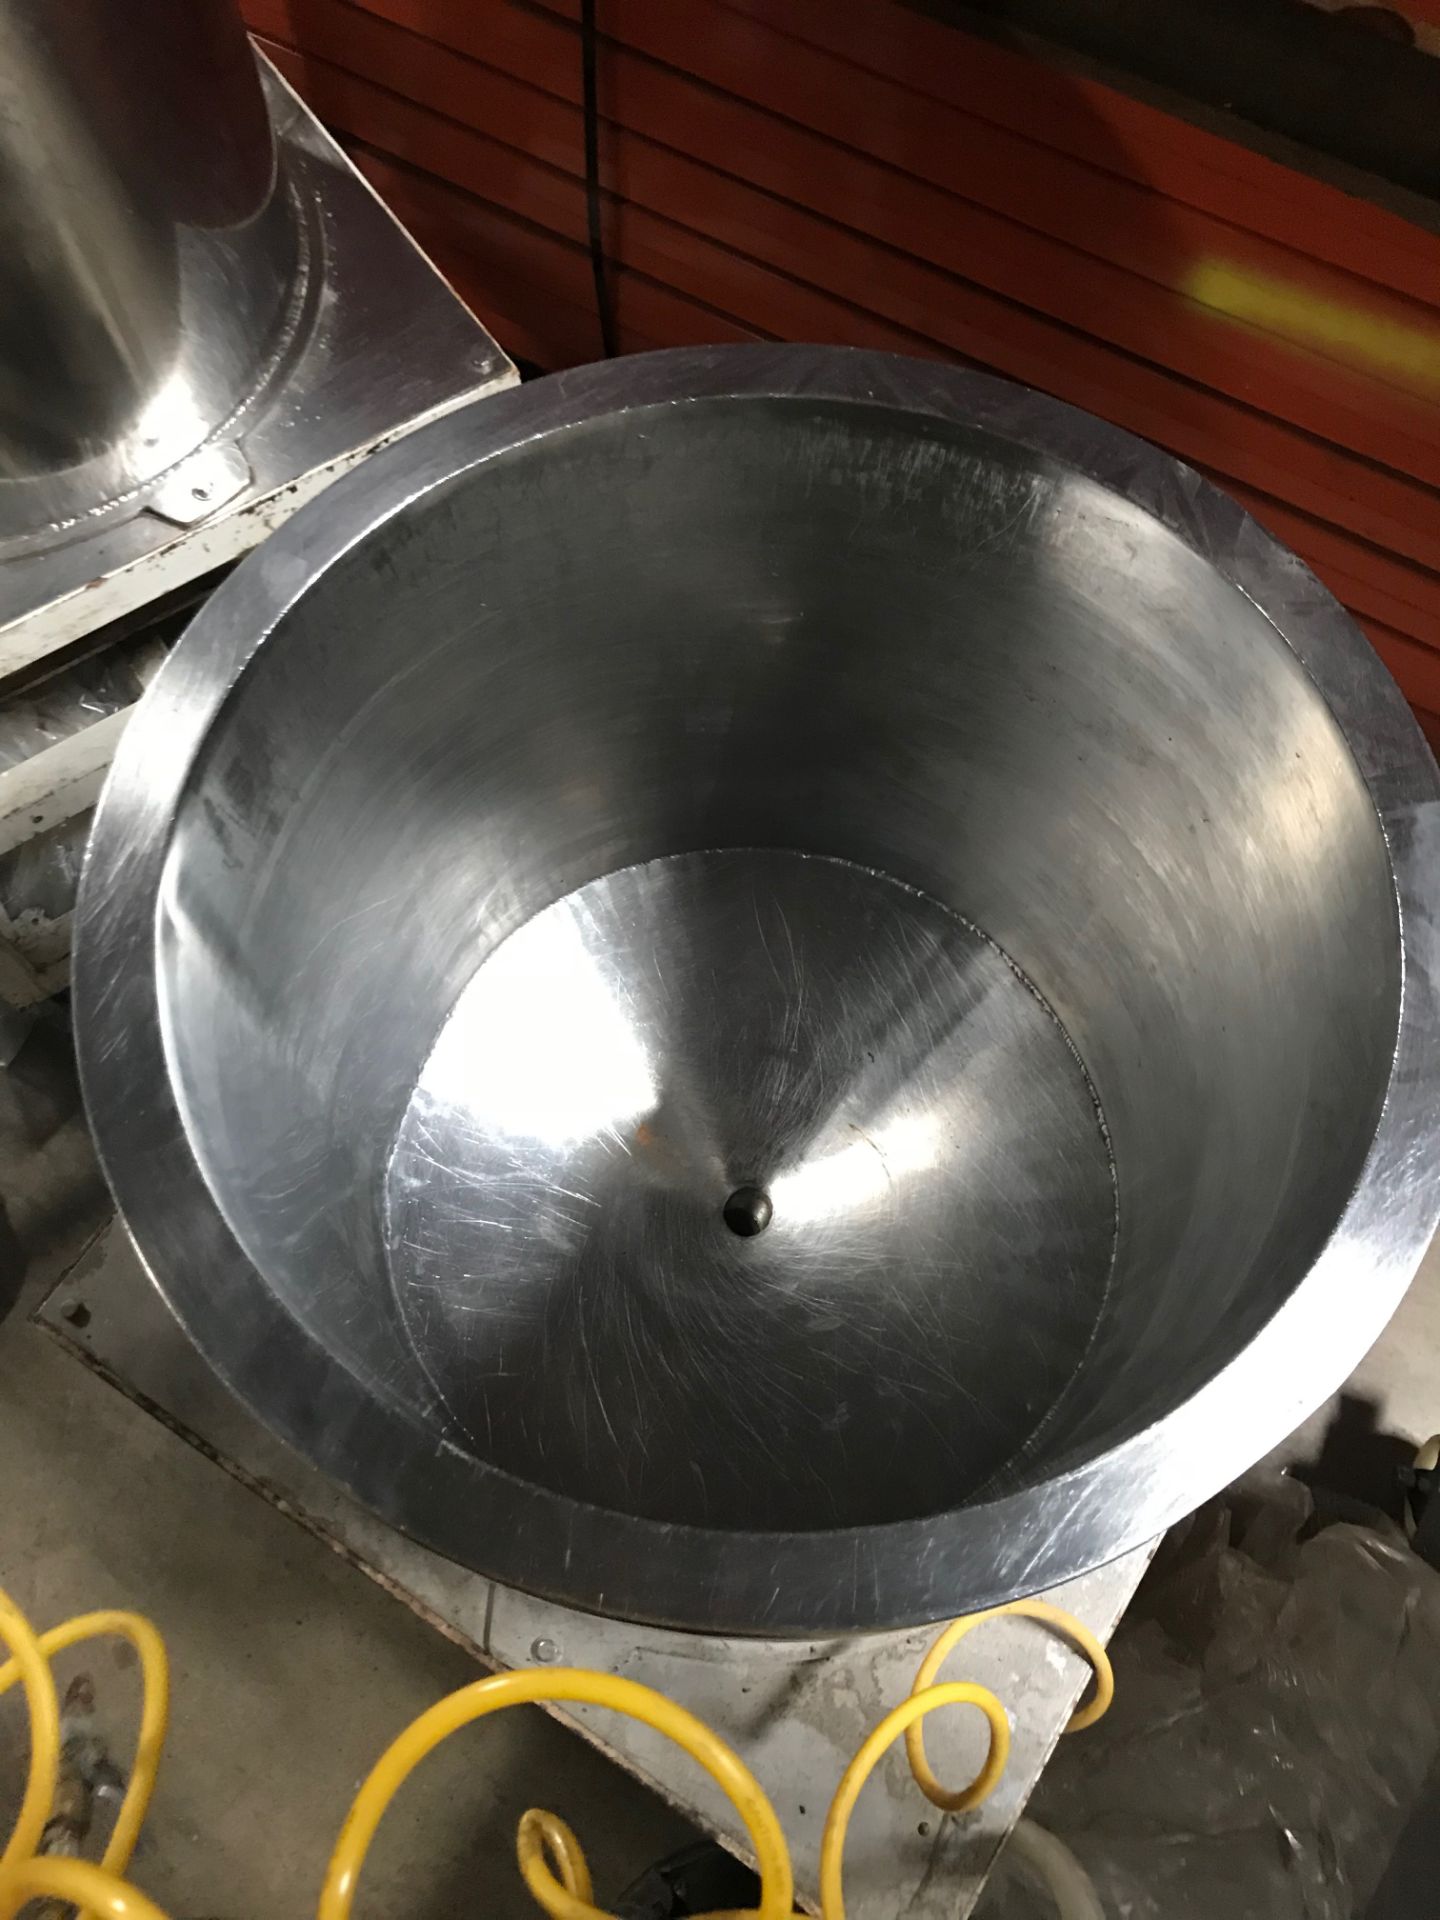 Stainless Steel Kettle, 18 inch Diameter x 16 inches tall - Image 2 of 4